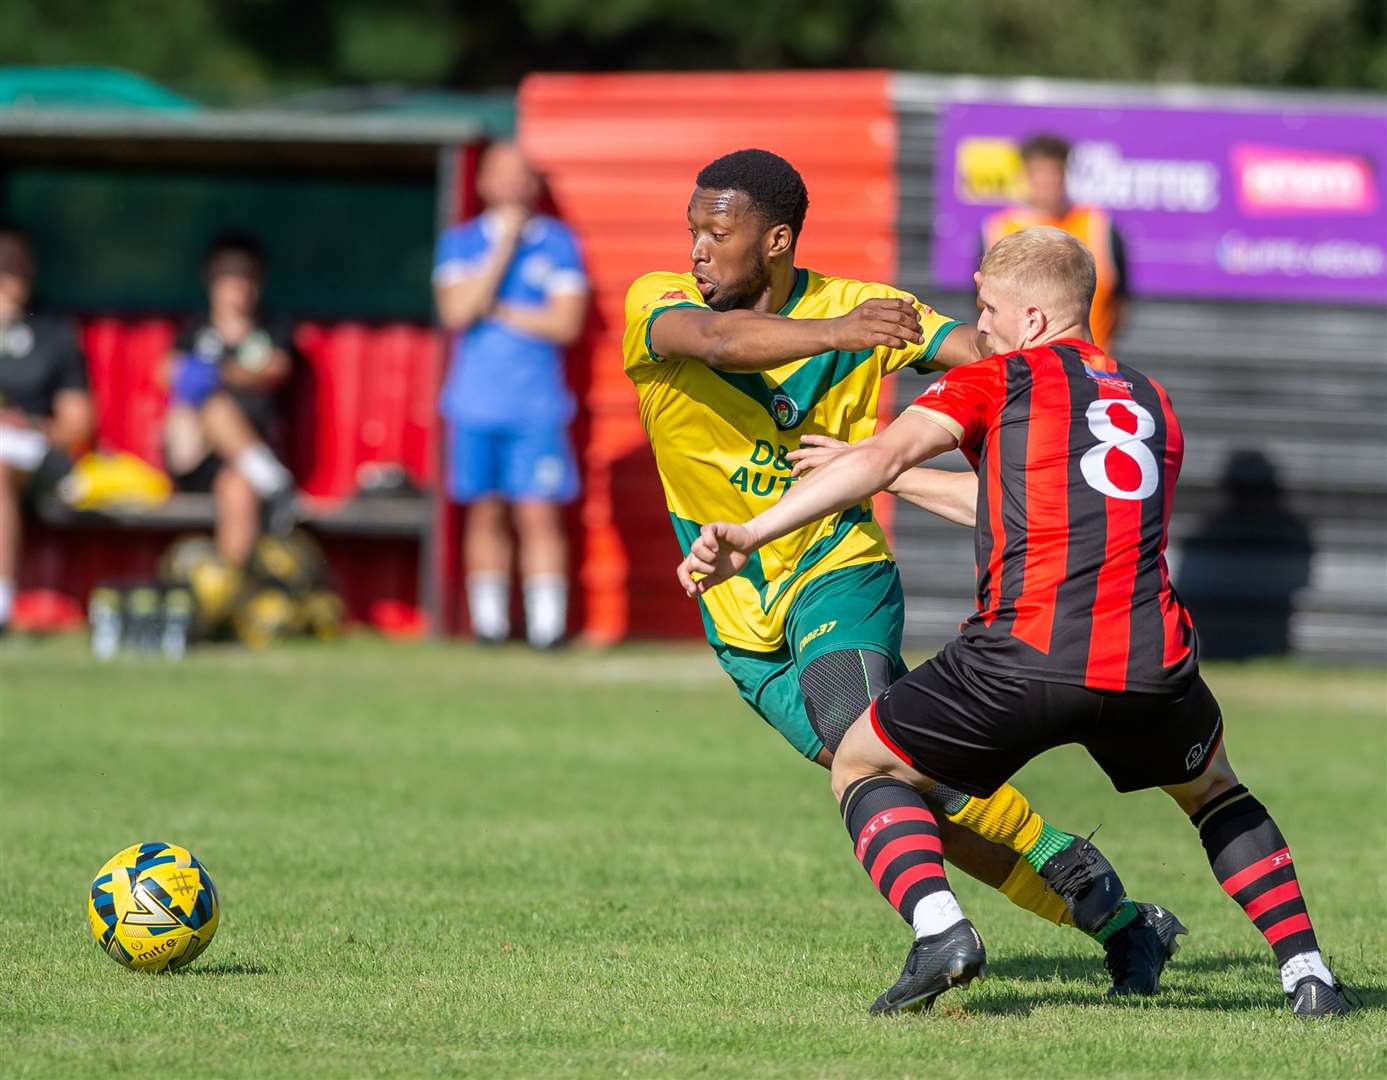 Ashford forward Vance Bola comes away with the ball. Picture: Ian Scammell/Isobel Scammell